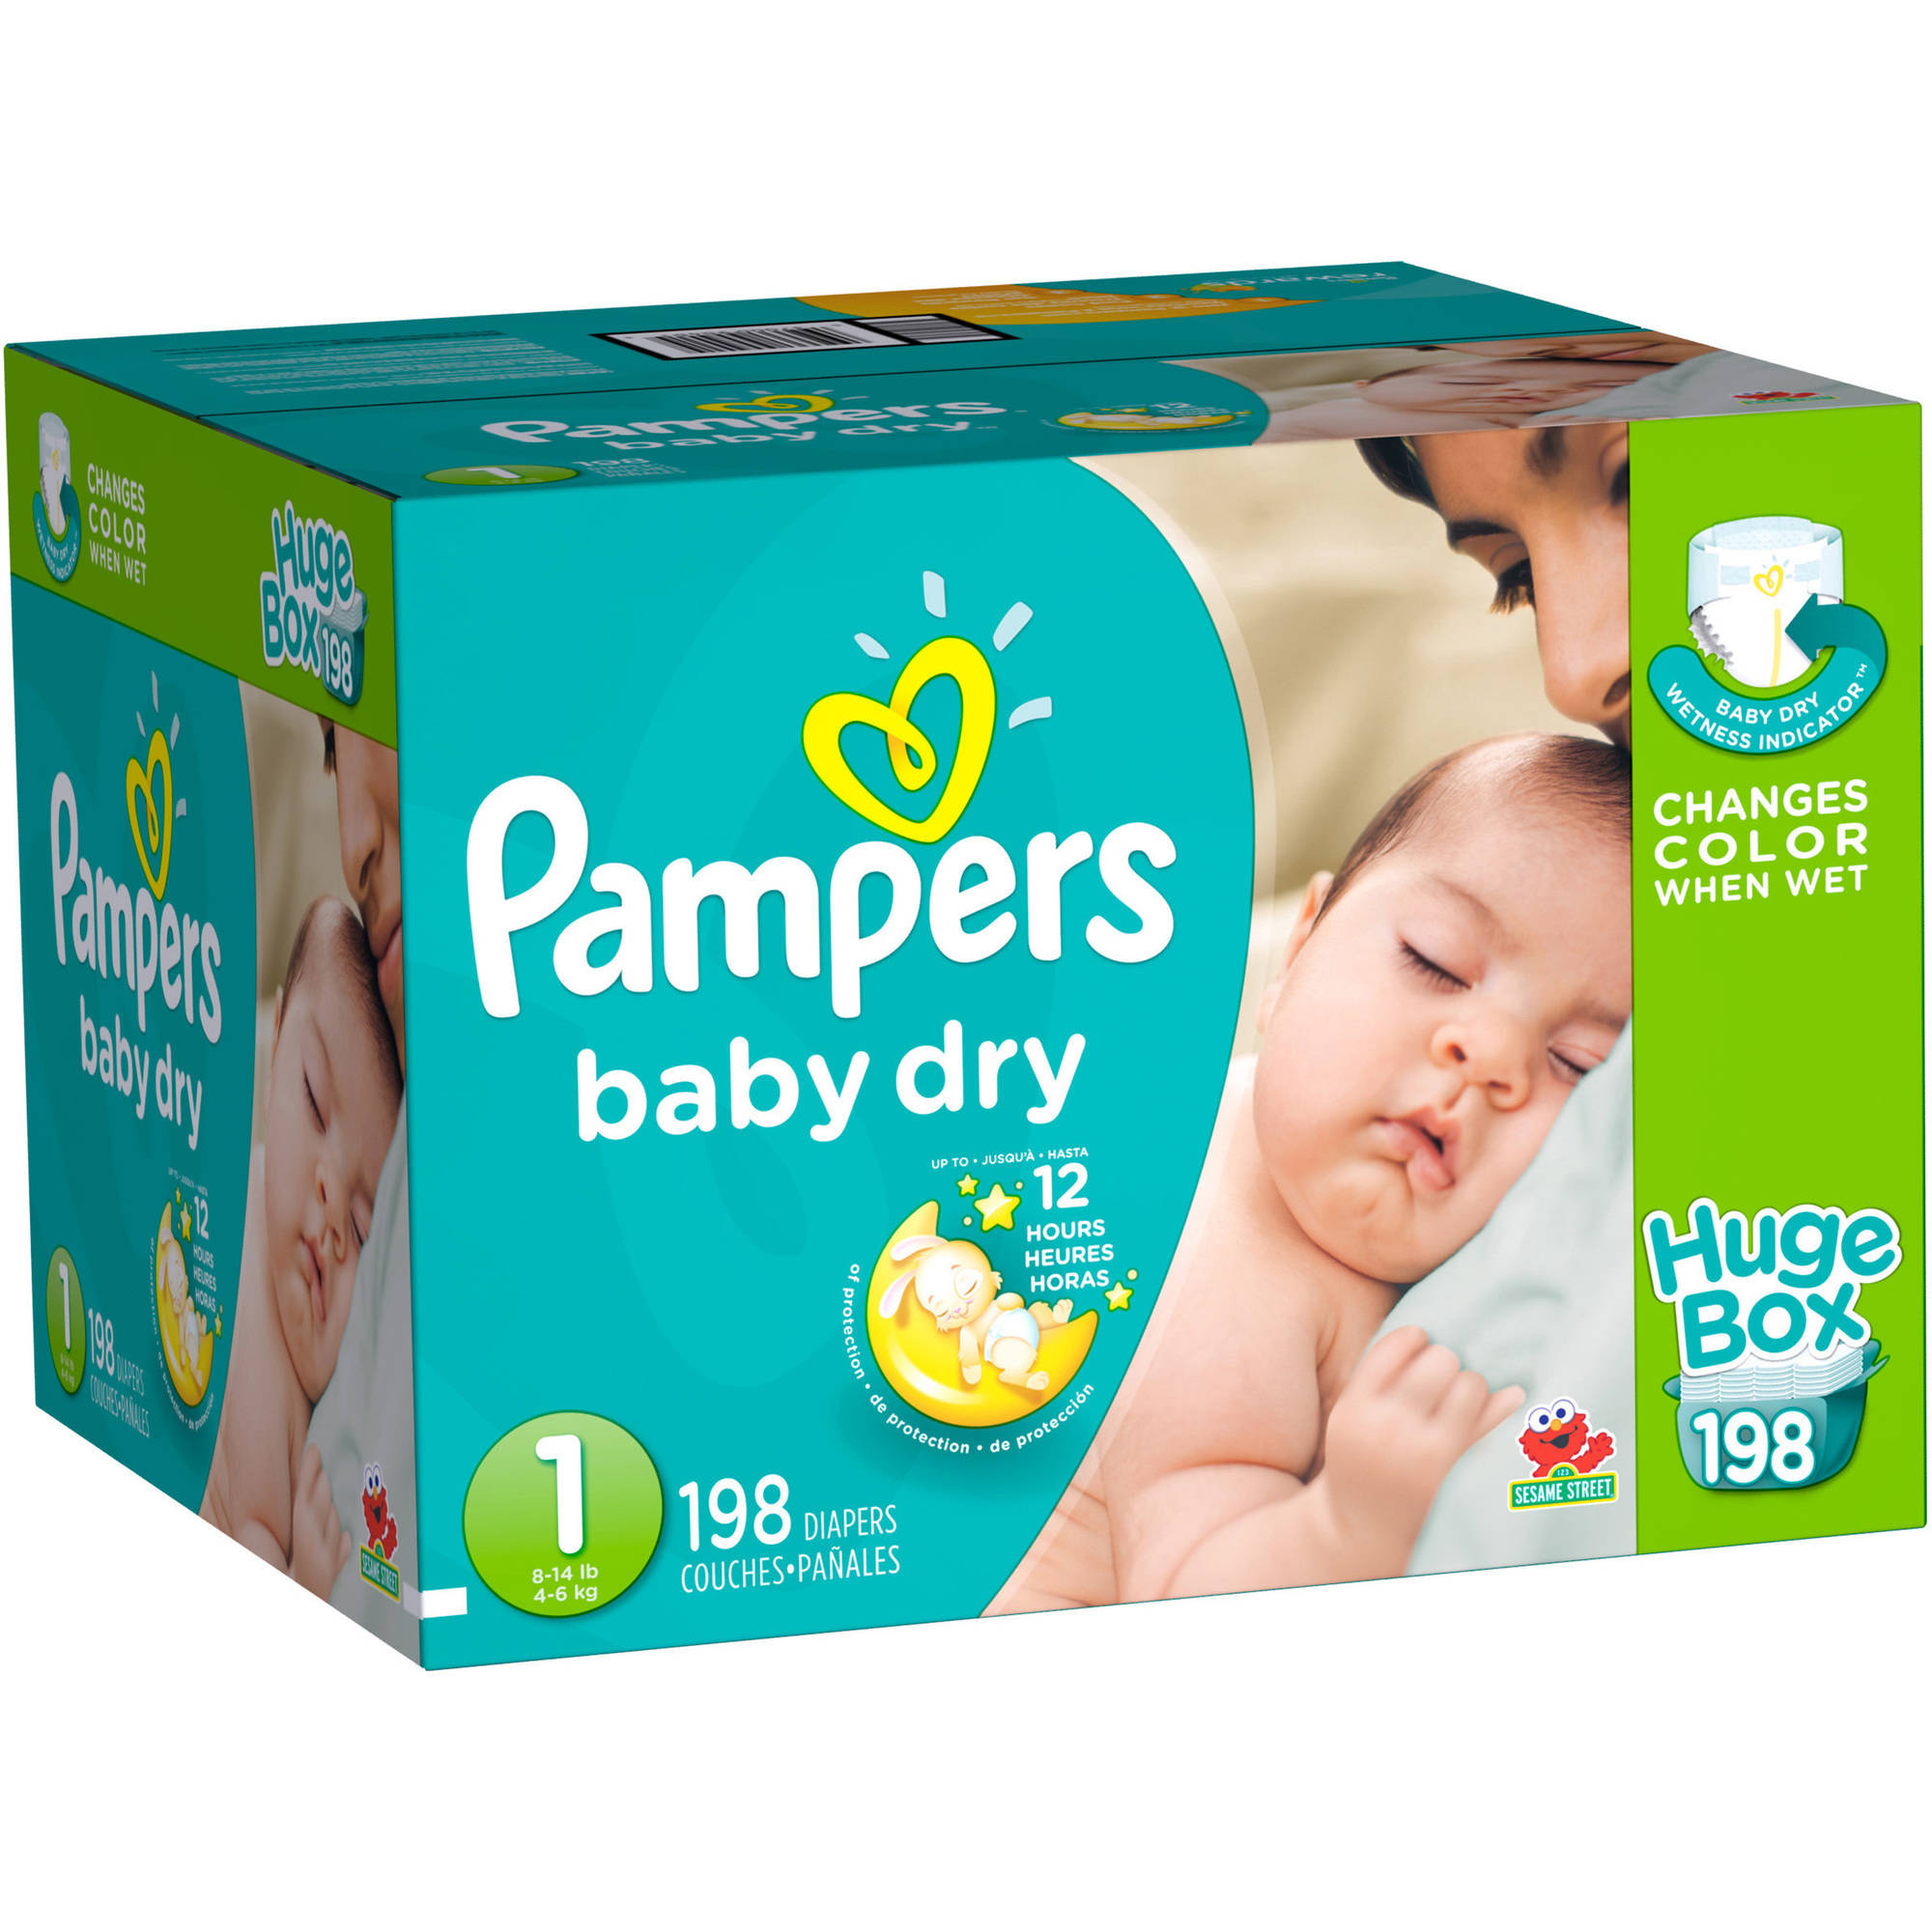 Pampers Baby Dry Diapers, Huge Pack, Size 1, 198 Diapers - image 1 of 8